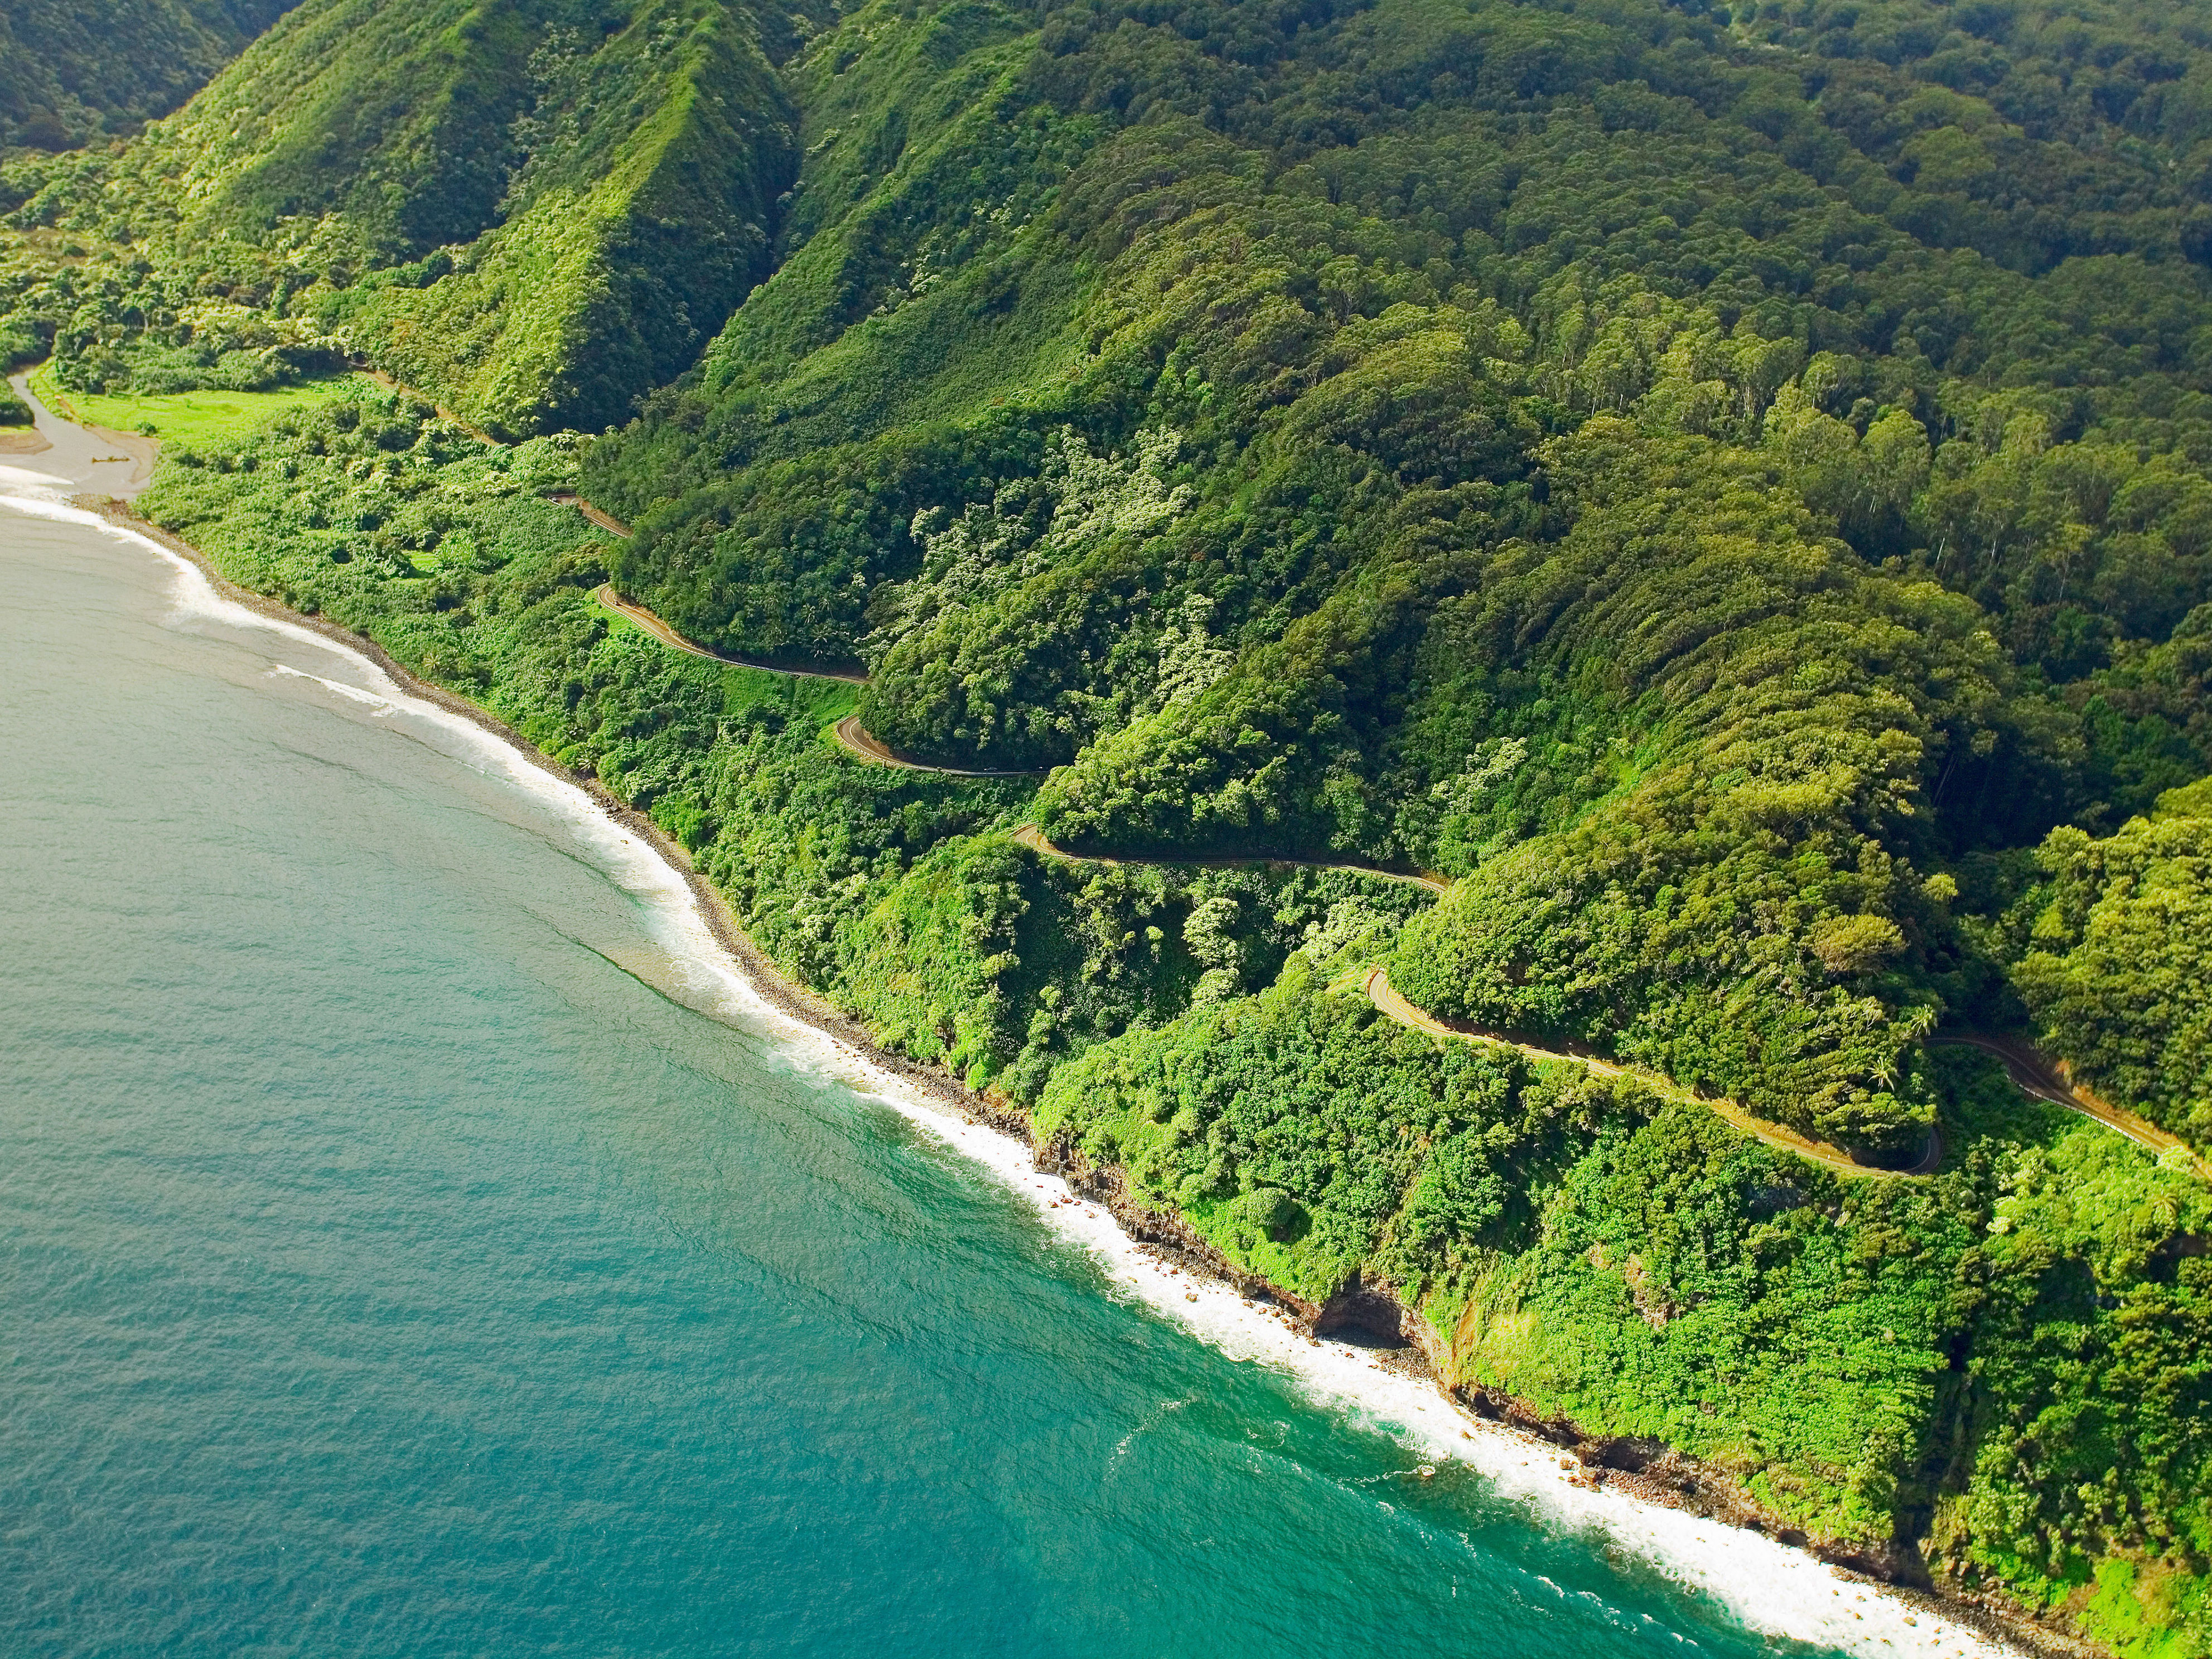 <p>Not all roads are created equal, and this 64-mile stretch, known as the Hana Highway or Road to Hana, is one of the most thrilling. It snakes along the northeastern coast of <a href="https://www.cntraveler.com/destinations/maui?mbid=synd_msn_rss&utm_source=msn&utm_medium=syndication">Maui</a> with 600 curvy bends and 50-plus-wait-your-turn bridges (we suggest a Jeep Wrangler for this journey) taking you past towering coastal cliffs, plunging waterfalls, dense jungle, and panoramic views of the Pacific Ocean.</p> <p><strong>Where to stop:</strong> With its bamboo canopy, Waikamoi Nature Trail is worth a pitstop, even more so as it’s often overlooked. The dreamy hike here takes less than a mile but remember to pack sturdy shoes if it’s wet, as the trail can be slippery. The mystical Waikani Falls and volcanic <a href="https://www.cntraveler.com/gallery/most-beautiful-black-sand-beaches-in-the-world?mbid=synd_msn_rss&utm_source=msn&utm_medium=syndication">black sand beaches</a> at Wai’ainapanapa State Park are both unmissable.</p> <p><strong>Where to eat:</strong> The sleepy <a href="https://www.twinfallsmaui.net/farm-stand/">Wailele farm stand at Twin Falls</a> is a great spot: try the cold brew, Maui-grown coffee, or some of the farm’s all-natural, dairy-free coconut ice cream.</p> <p><strong>Where to stay:</strong> The blissed-out, television-free <a href="https://www.cntraveler.com/hotels/united-states/hana/travaasa-hana-maui?mbid=synd_msn_rss&utm_source=msn&utm_medium=syndication">Travaasa Hana</a> allows you to decompress, island-style. Try everything from stand up paddle boarding to coconut husking, or just book a traditional Hawaiian Lomilomi healing massage at the spa. There’s also the <a href="https://www.cntraveler.com/hotels/hana/hana-maui-resort?mbid=synd_msn_rss&utm_source=msn&utm_medium=syndication">Hāna-Maui Resort</a>, where you can book an Ocean Bungalow and soak in the sunset.</p><p>Sign up to receive the latest news, expert tips, and inspiration on all things travel</p><a href="https://www.cntraveler.com/newsletter/the-daily?sourceCode=msnsend">Inspire Me</a>